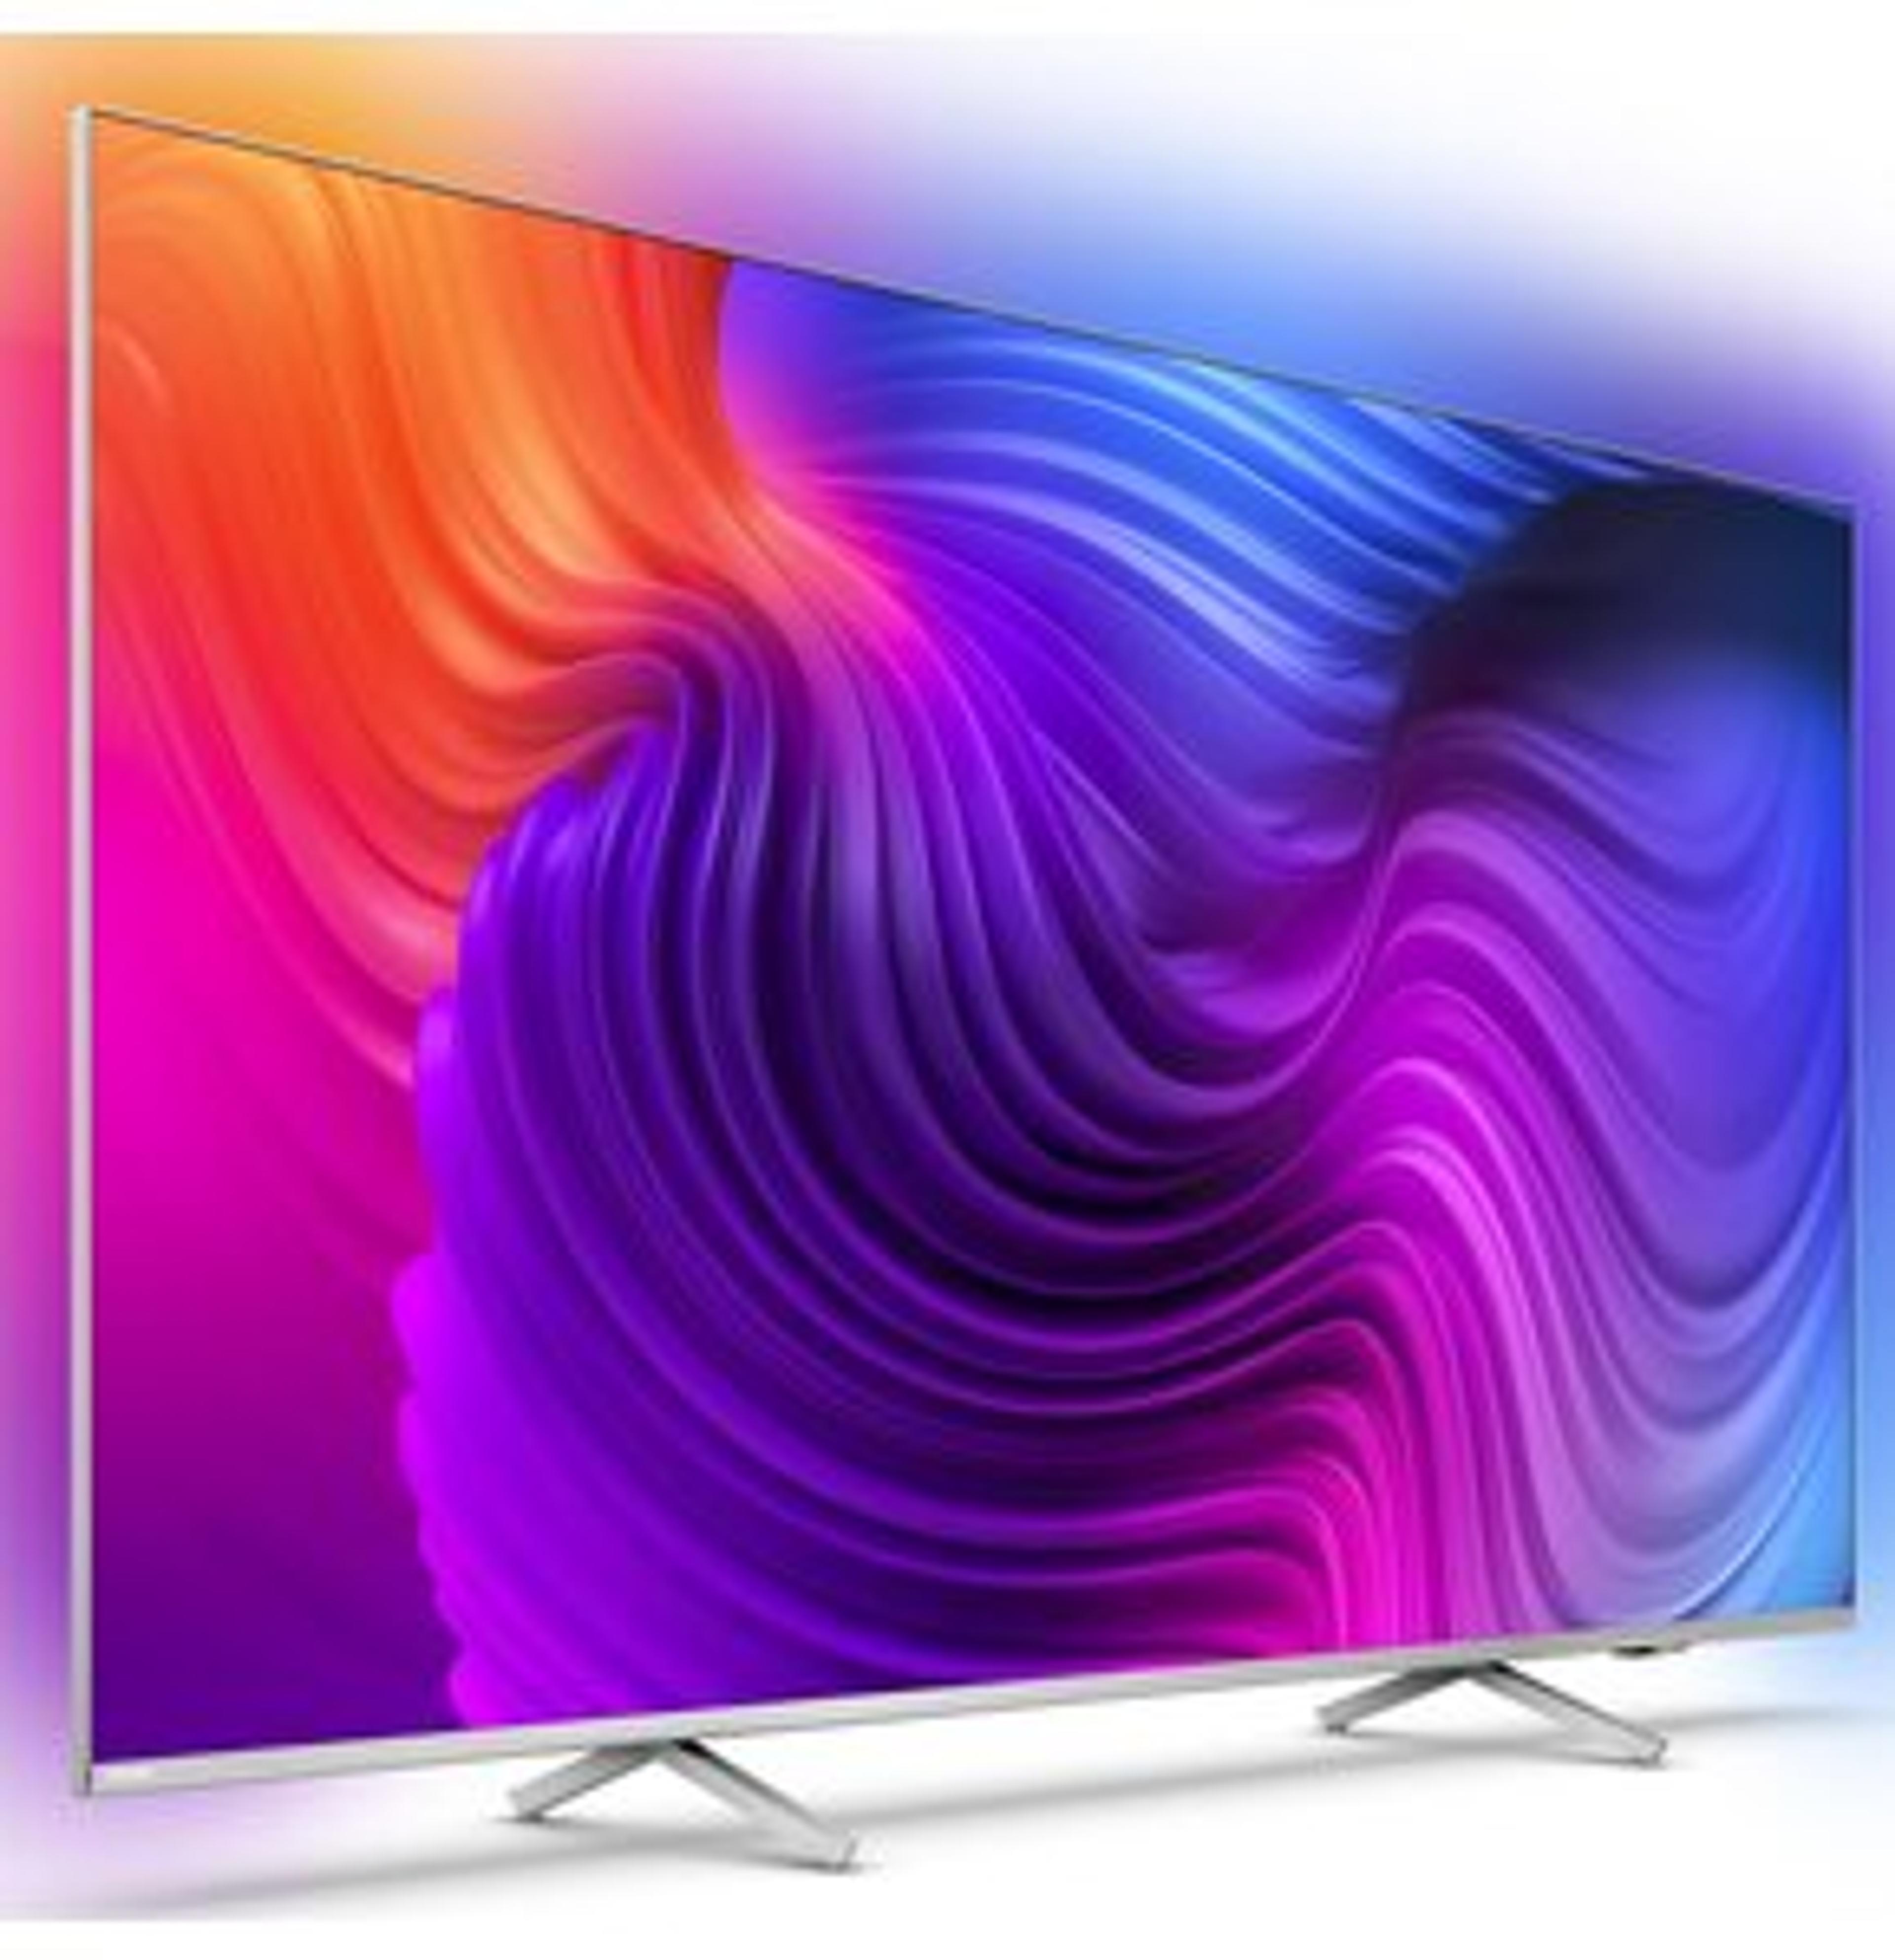 PHILIPS 70PUS8536/12 70" LED 4K Android TV Ambilight x3 Dolby Atmos Dolby Vision DVB-T2/HEVC/H.265 Telewizor - niskie ceny i opinie w Media Expert